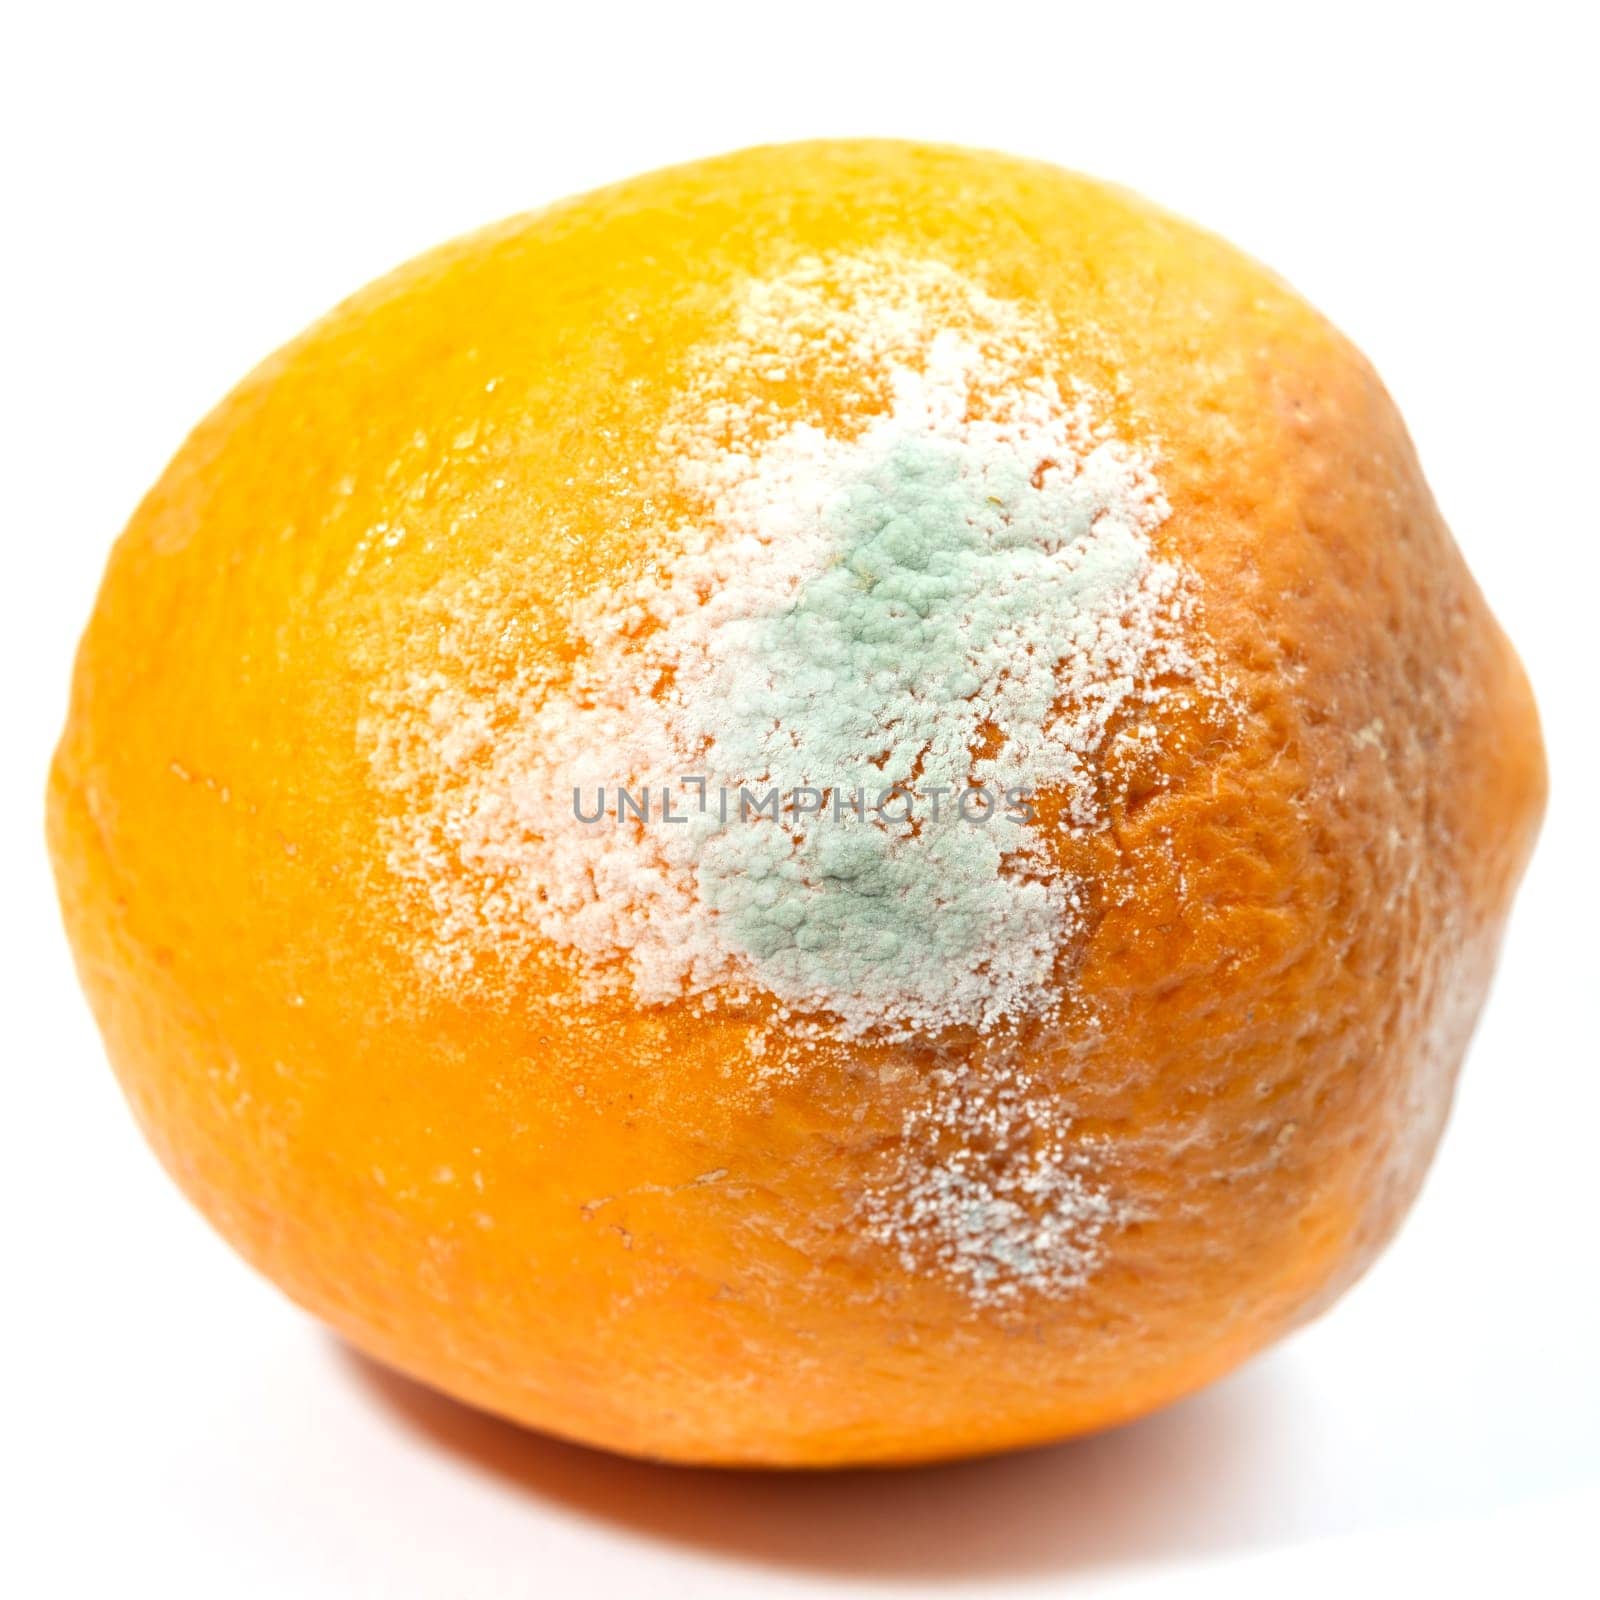 The big orange started to get moldy.